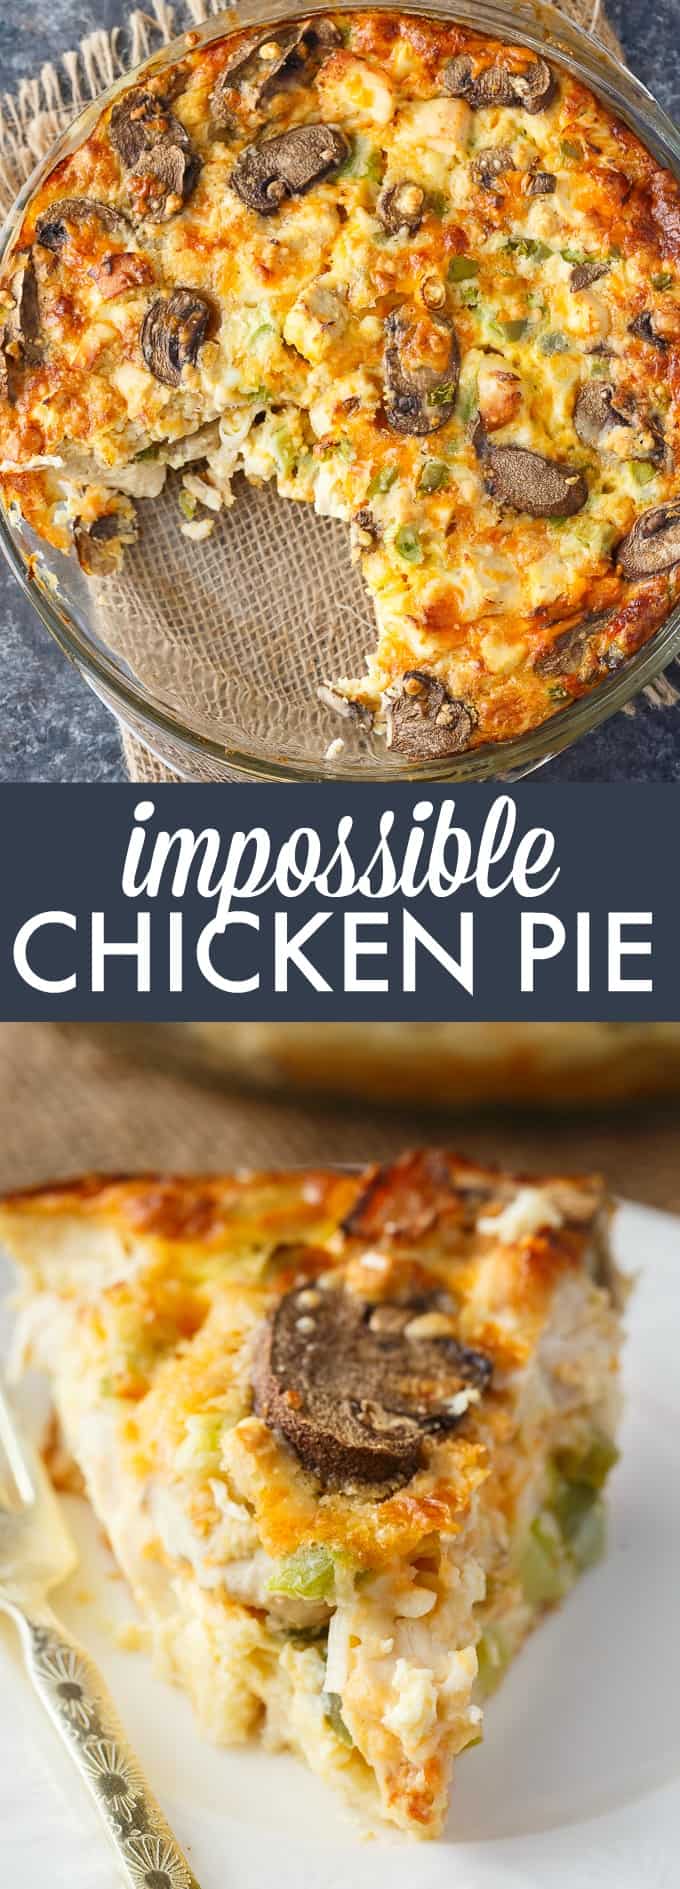 Impossible Chicken Pie - A delicious vintage meal for your family! This easy chicken pie bakes it own crust and is filled with tender chicken and veggies.